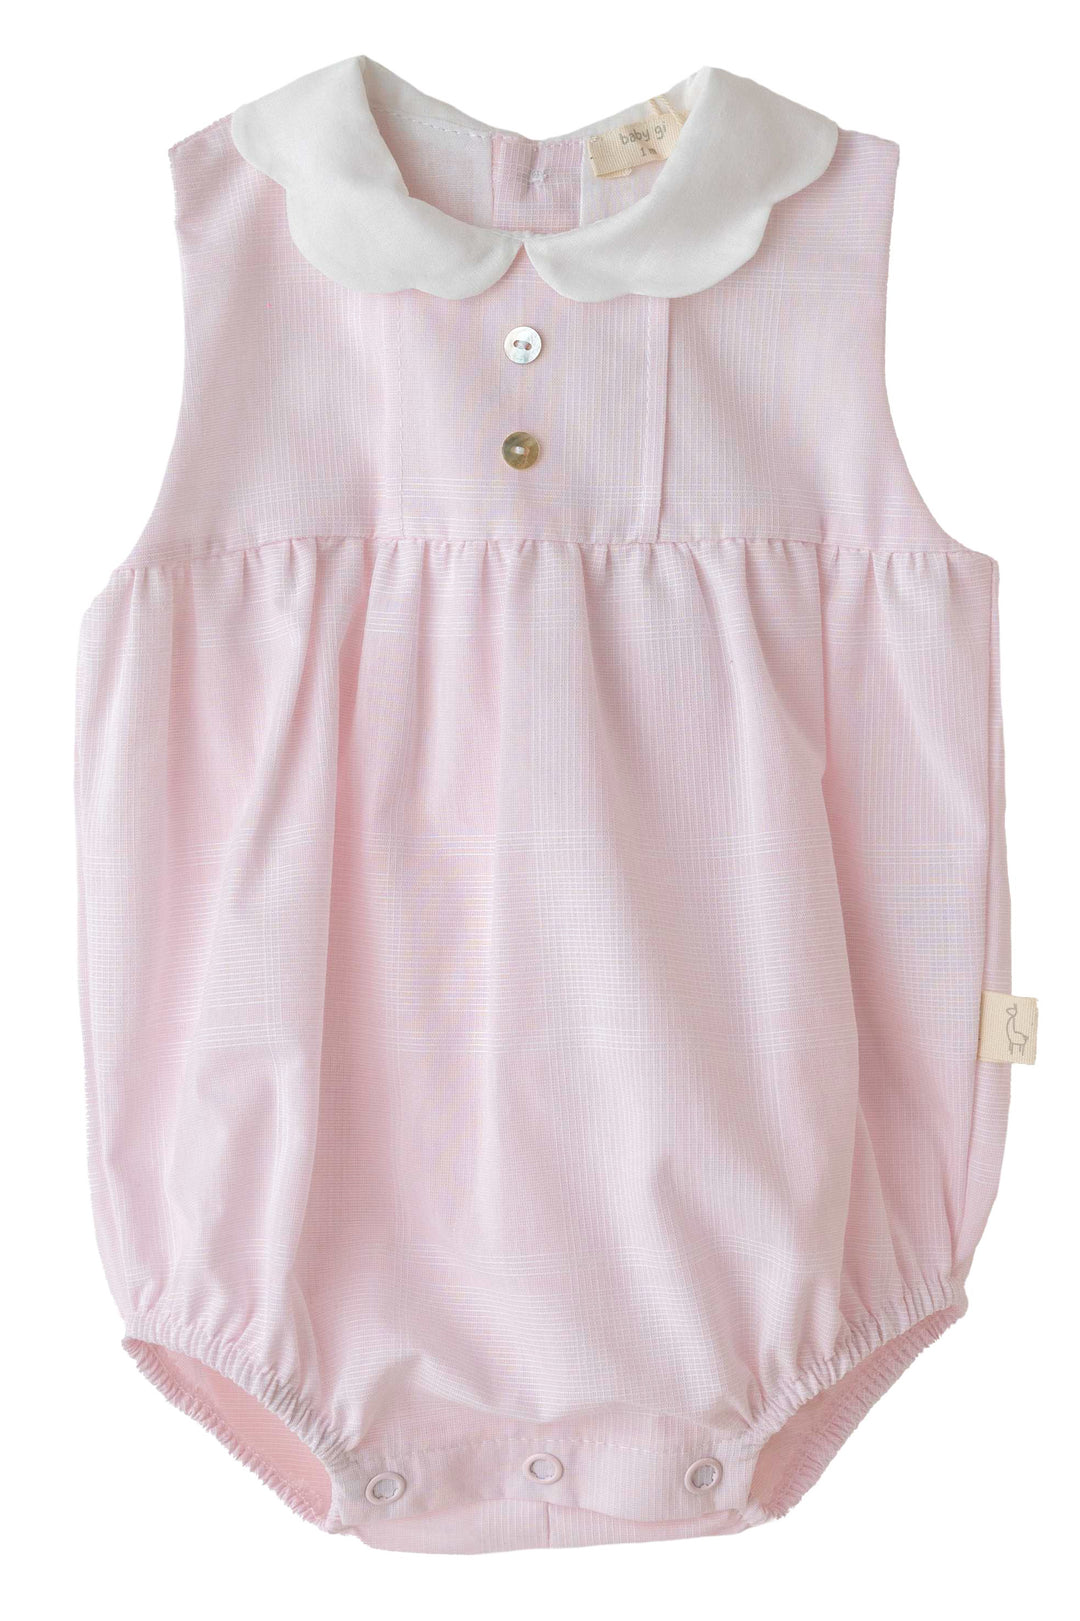 Baby Gi "Edith" Pink Checked Romper | Millie and John